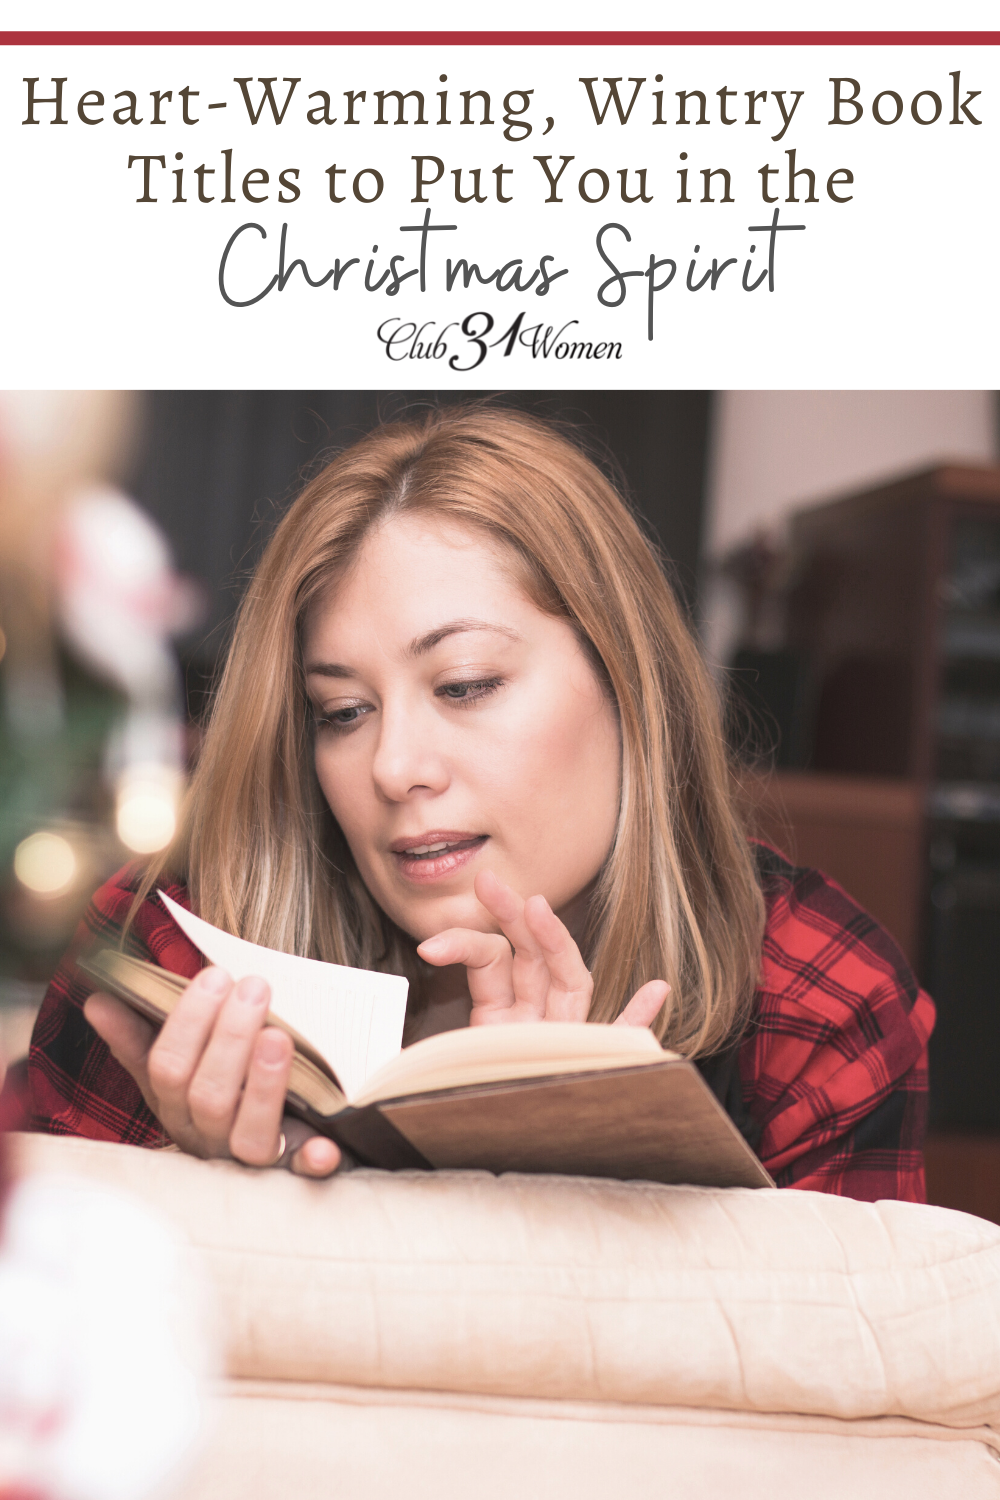 Sometimes stress or being overwhelmed can suck the Christmas Spirit right out of us. Here is a wonderful list of books to help revive it for you! via @Club31Women